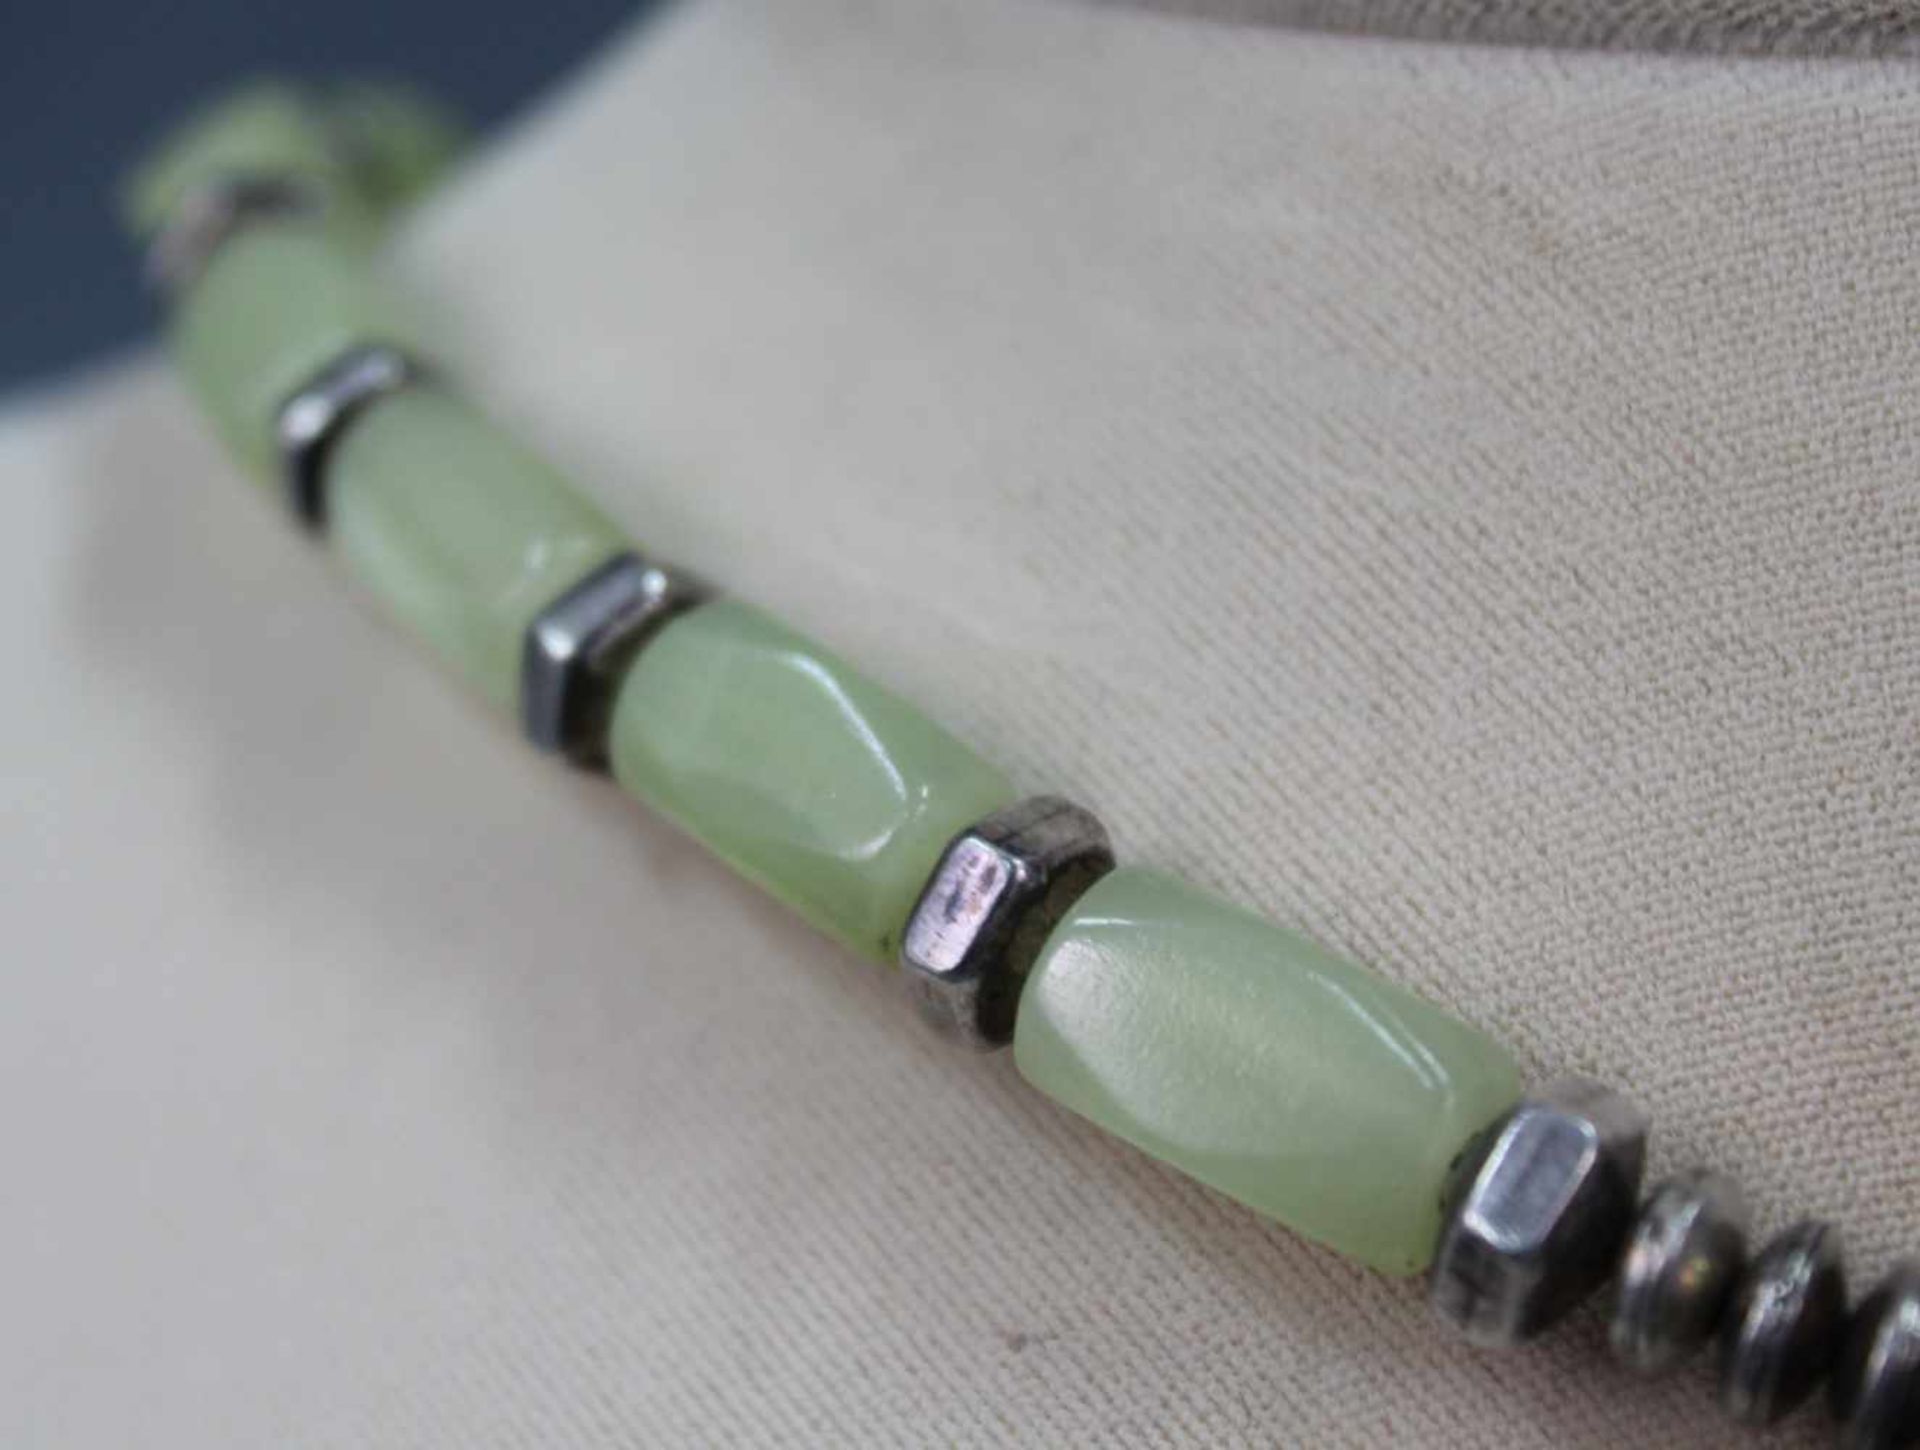 Collier. Hauptstein wohl Jade. Bandsteine wohl Prasiolith. Silber 925. 47 cm lang. Wohl China - Image 4 of 6